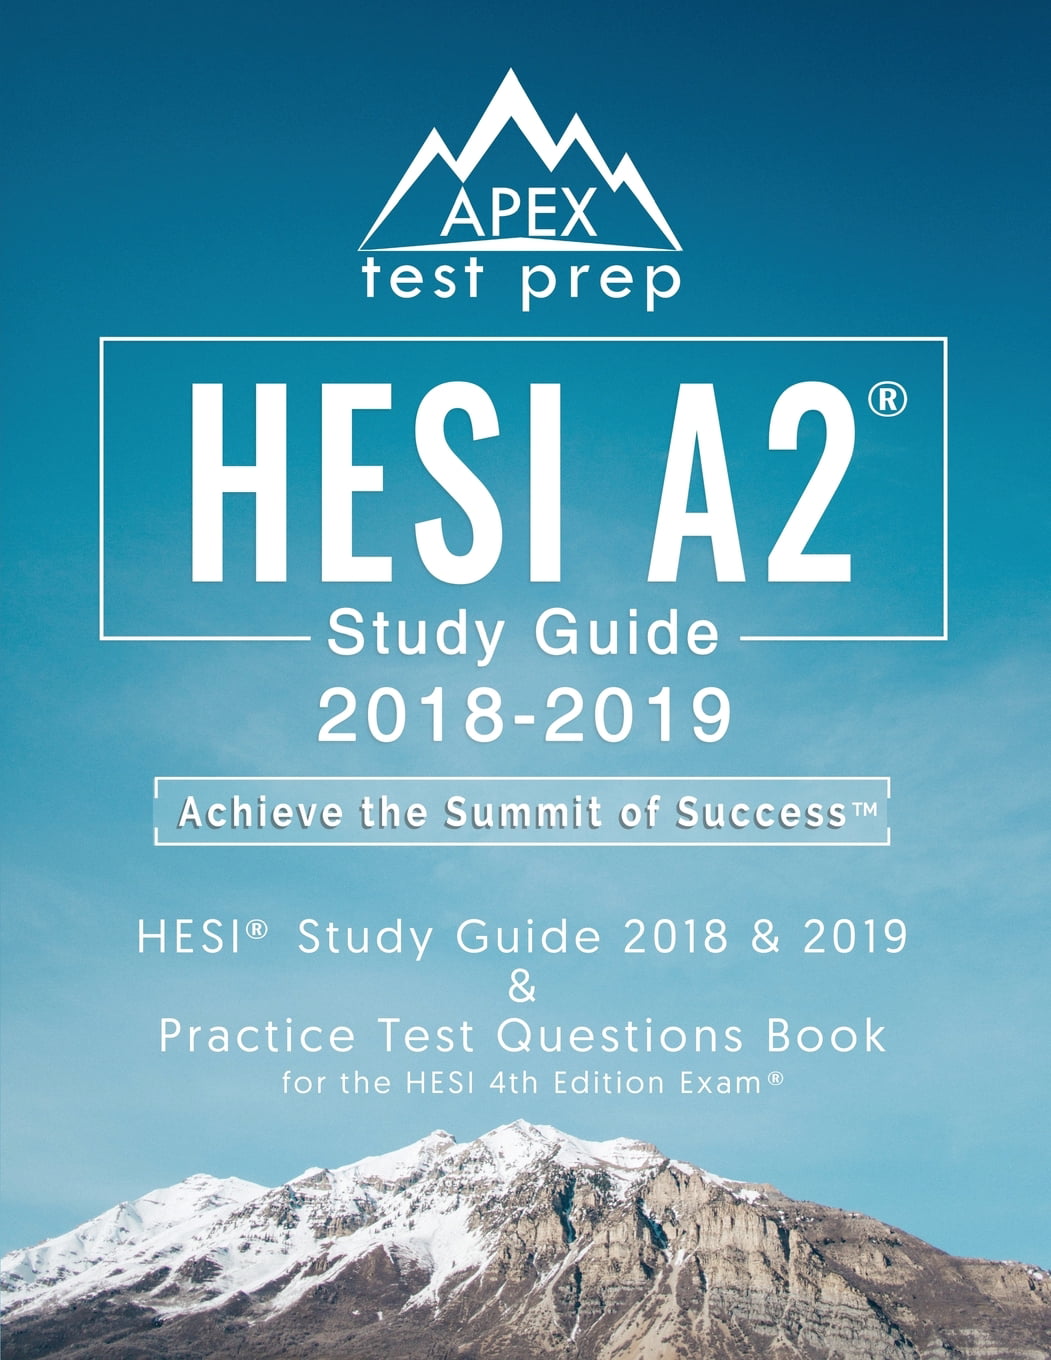 hesi-a2-study-guide-2018-2019-hesi-study-guide-2018-2019-and